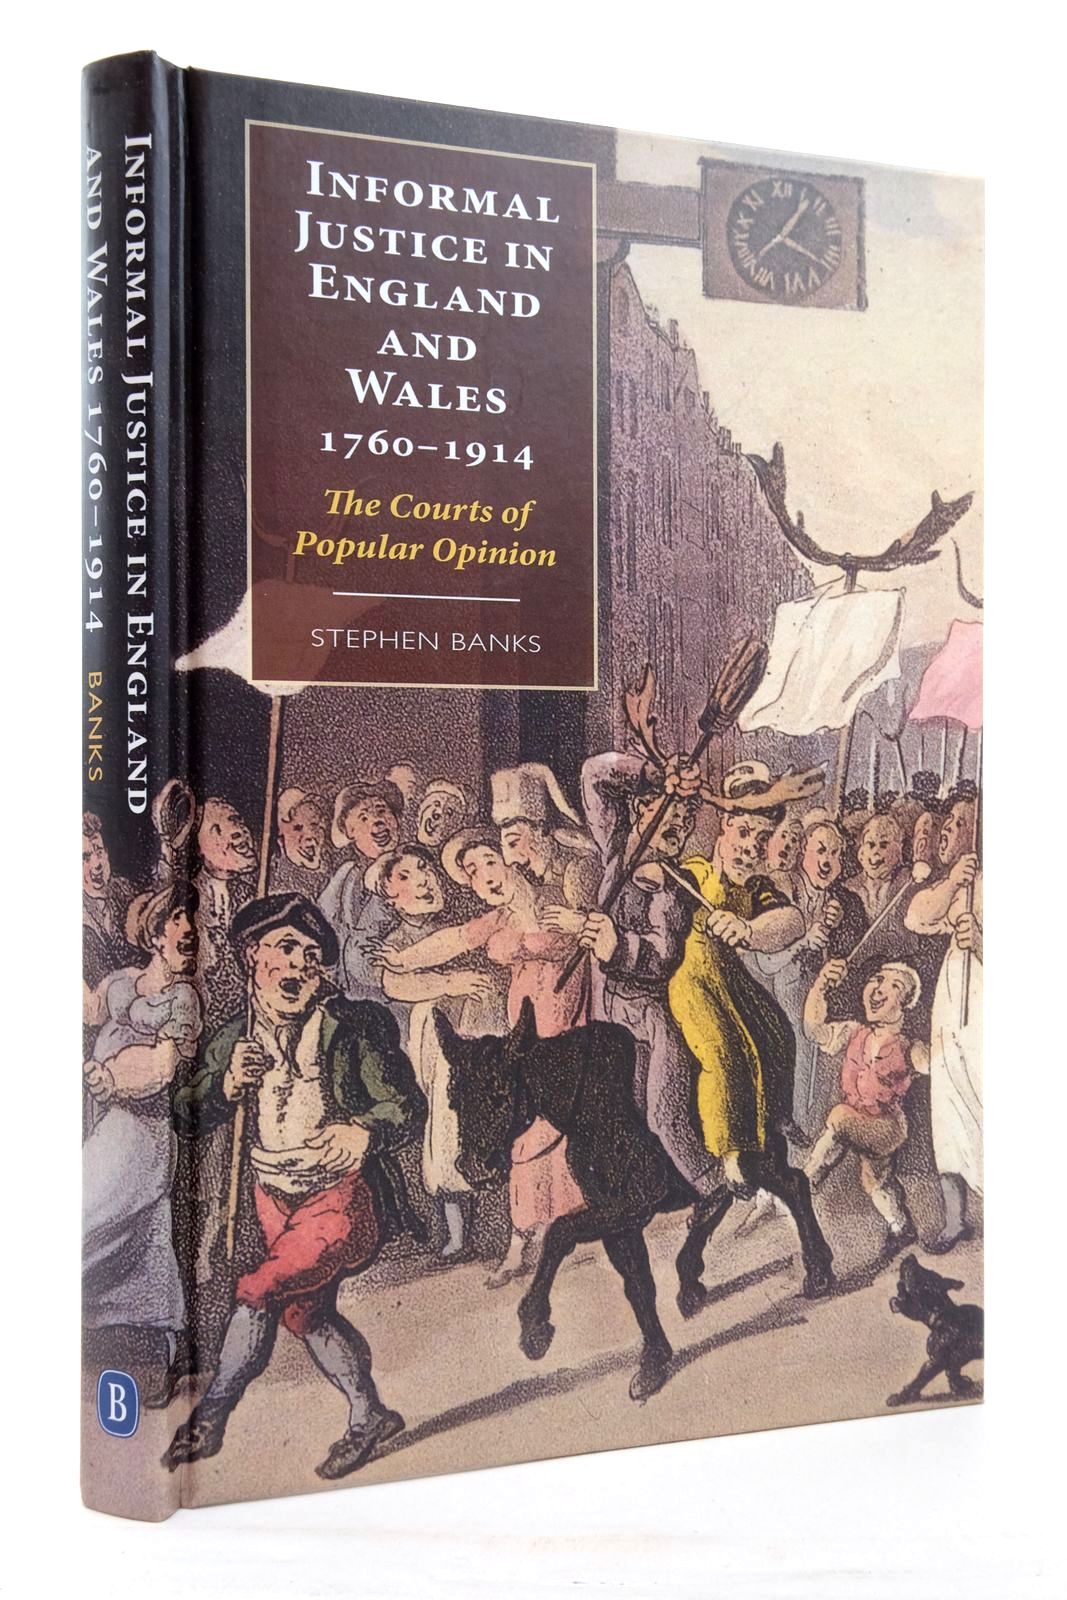 Photo of INFORMAL JUSTICE IN ENGLAND AND WALES 1760-1914 written by Banks, Stephen published by The Boydell Press (STOCK CODE: 2137374)  for sale by Stella & Rose's Books